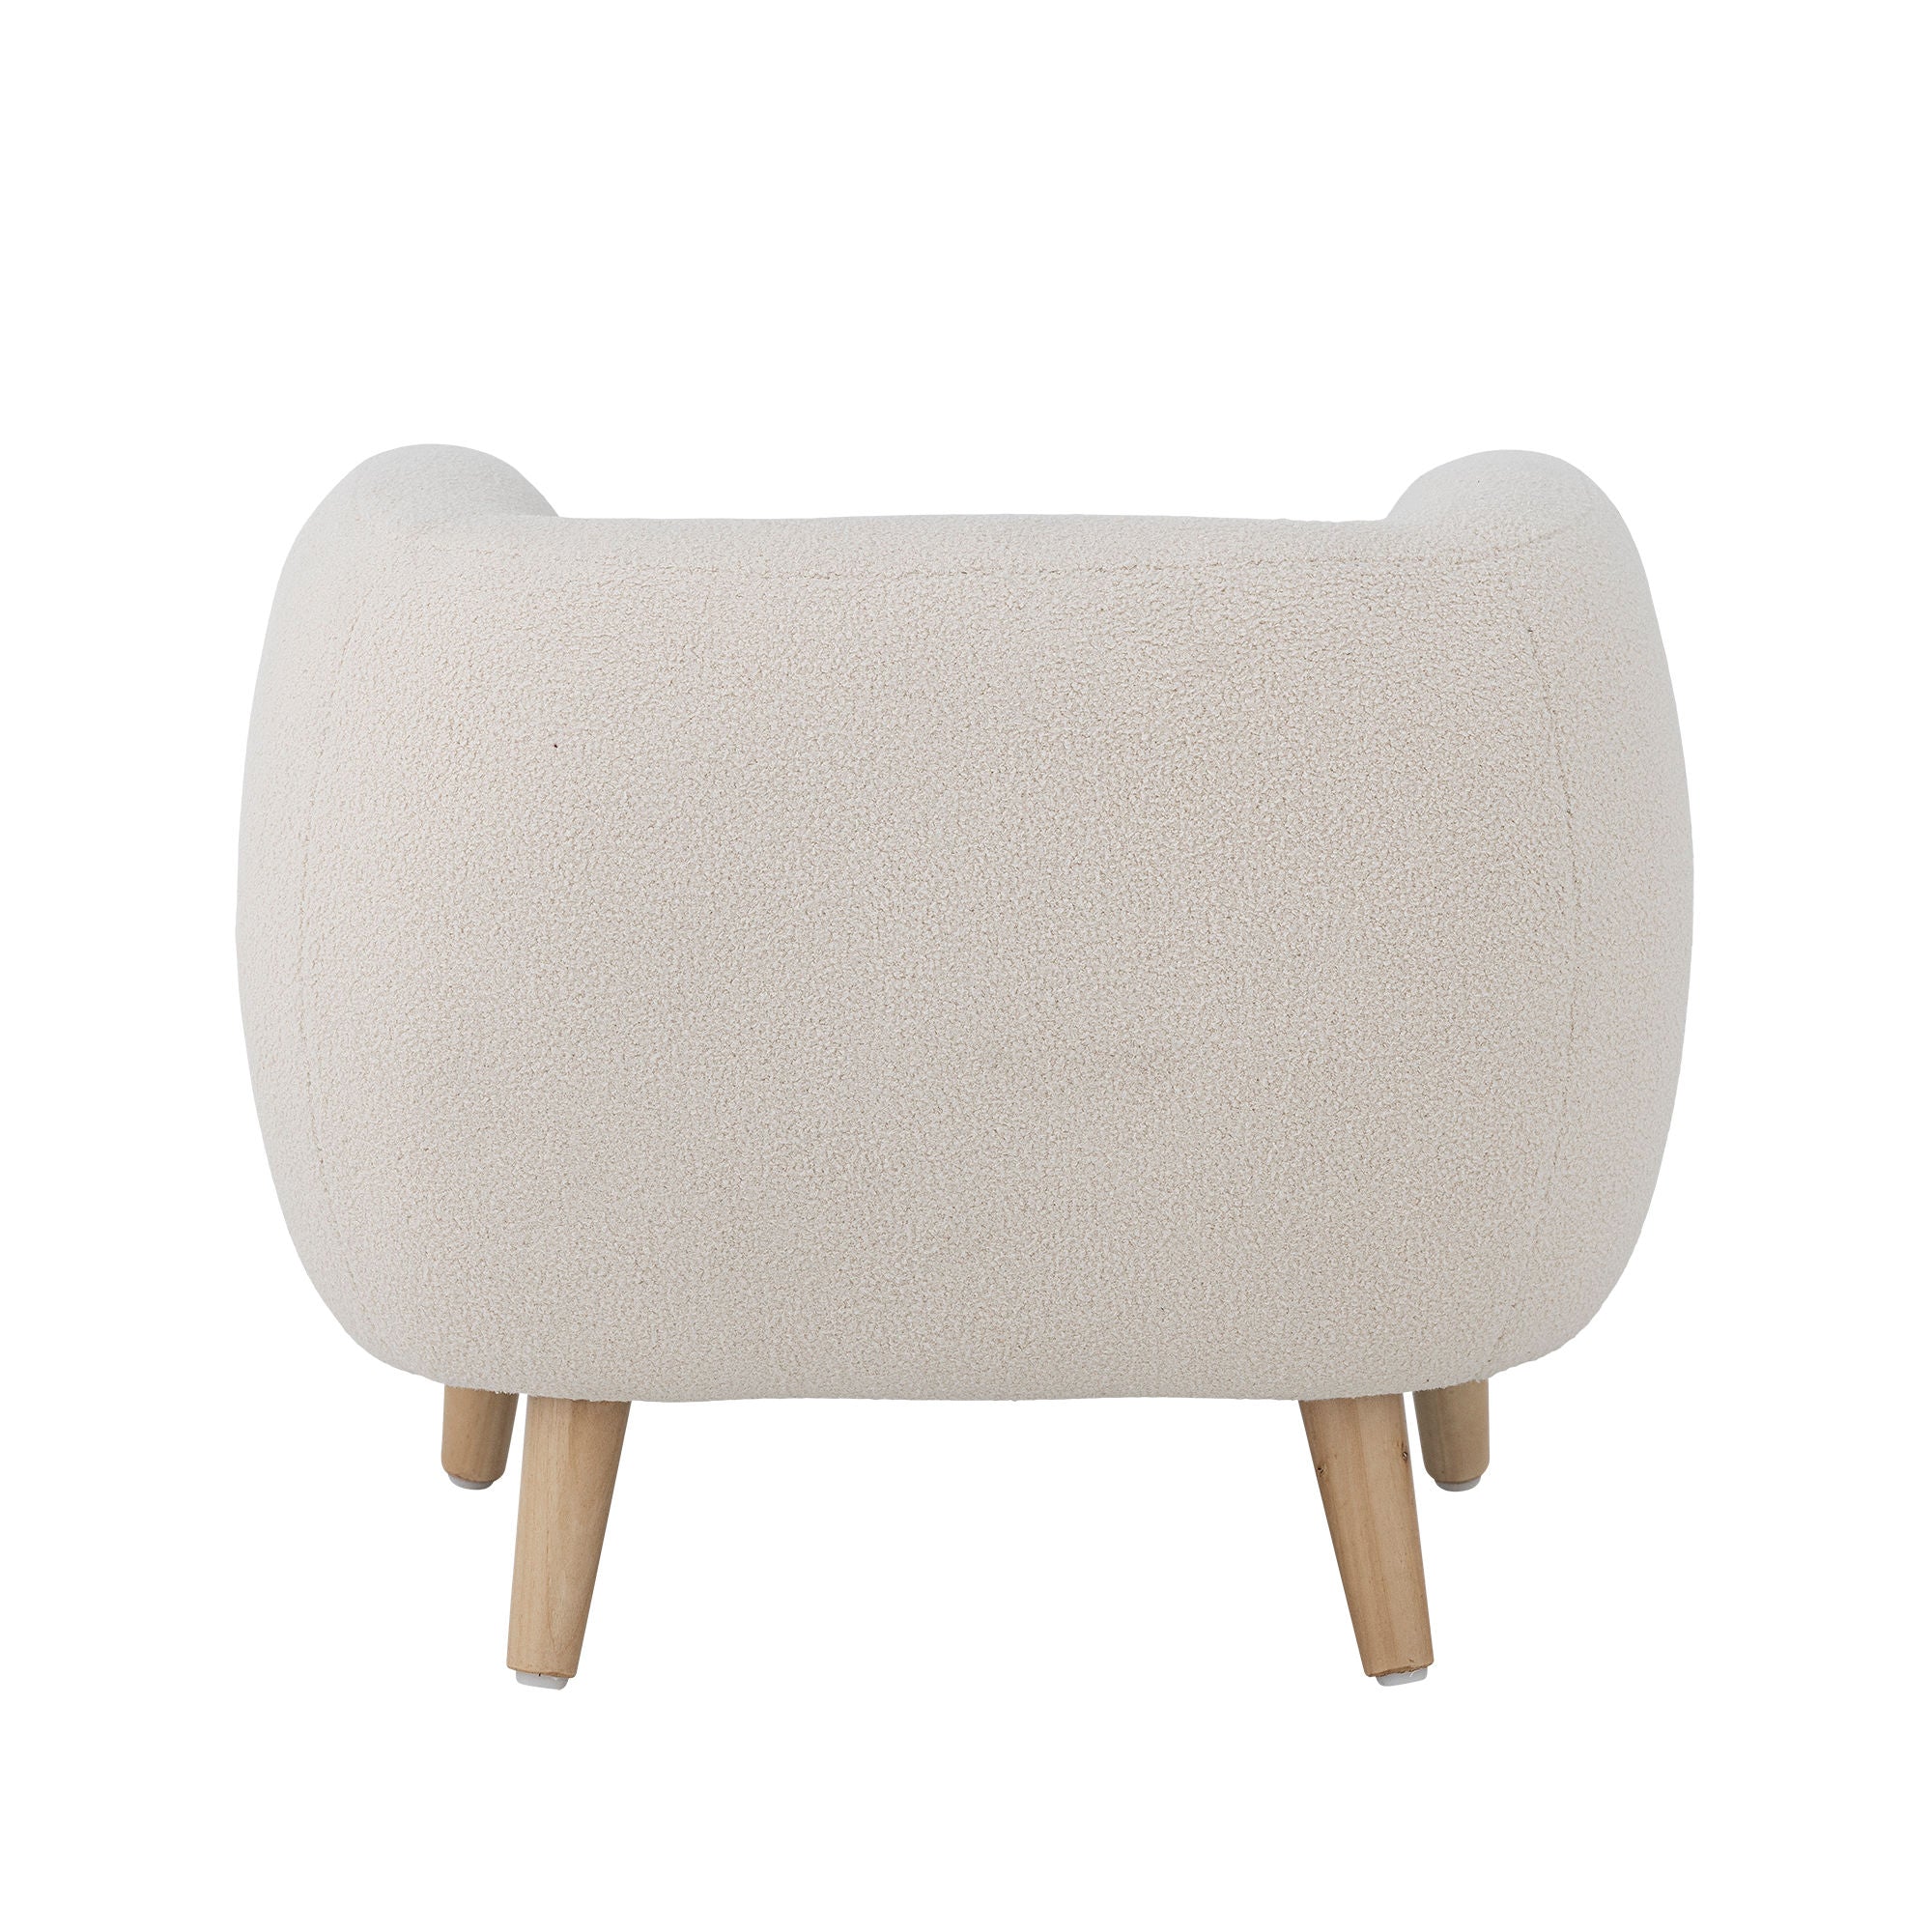 Bloomingville MINI Cade Lounge Chair, White, Polyester